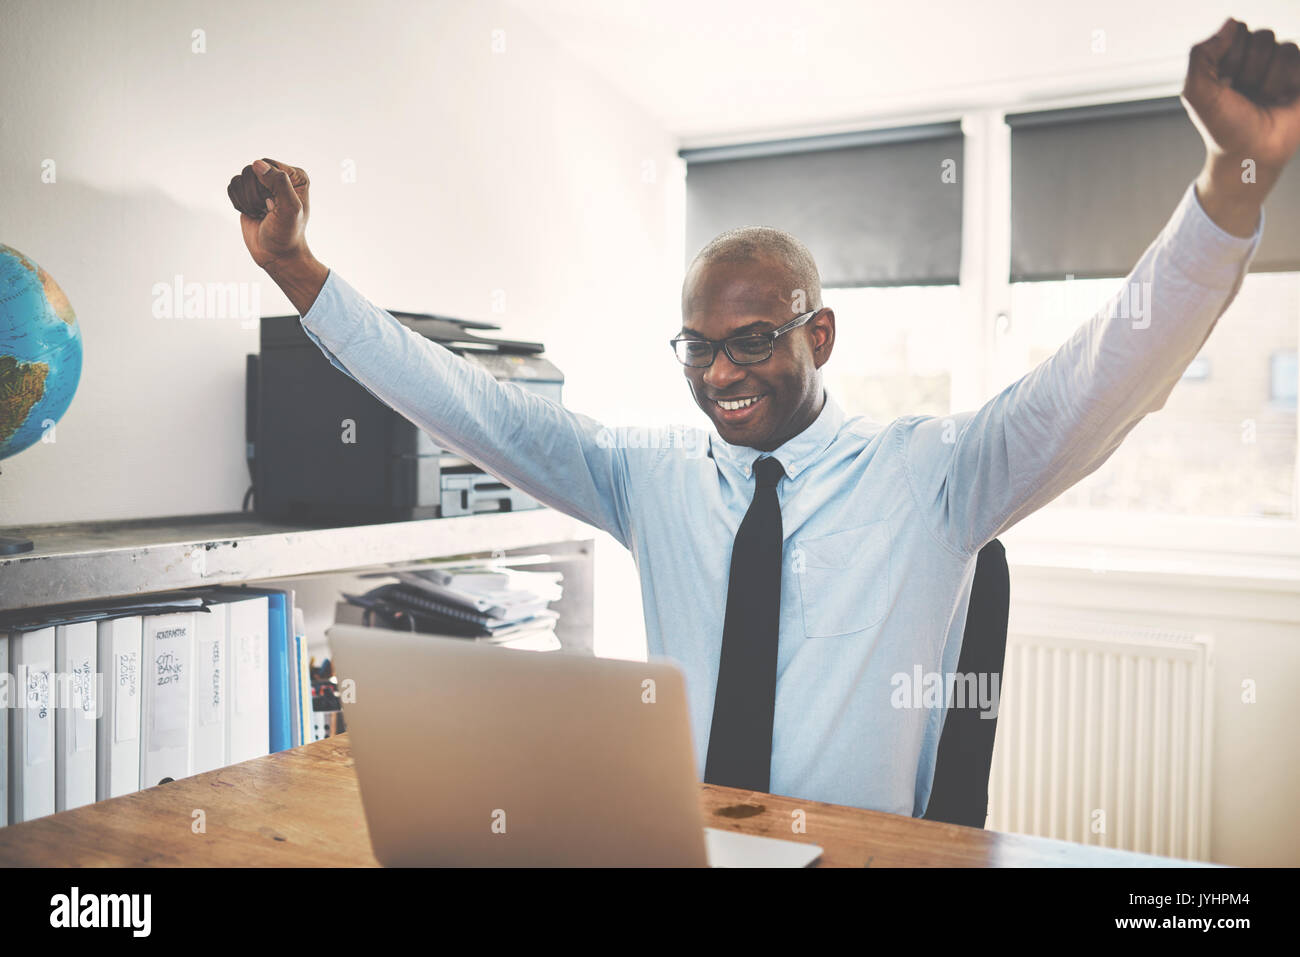 Smiling African businessman celebrating with his arms raised in the air while sitting at a desk in his home office working on a laptop Stock Photo